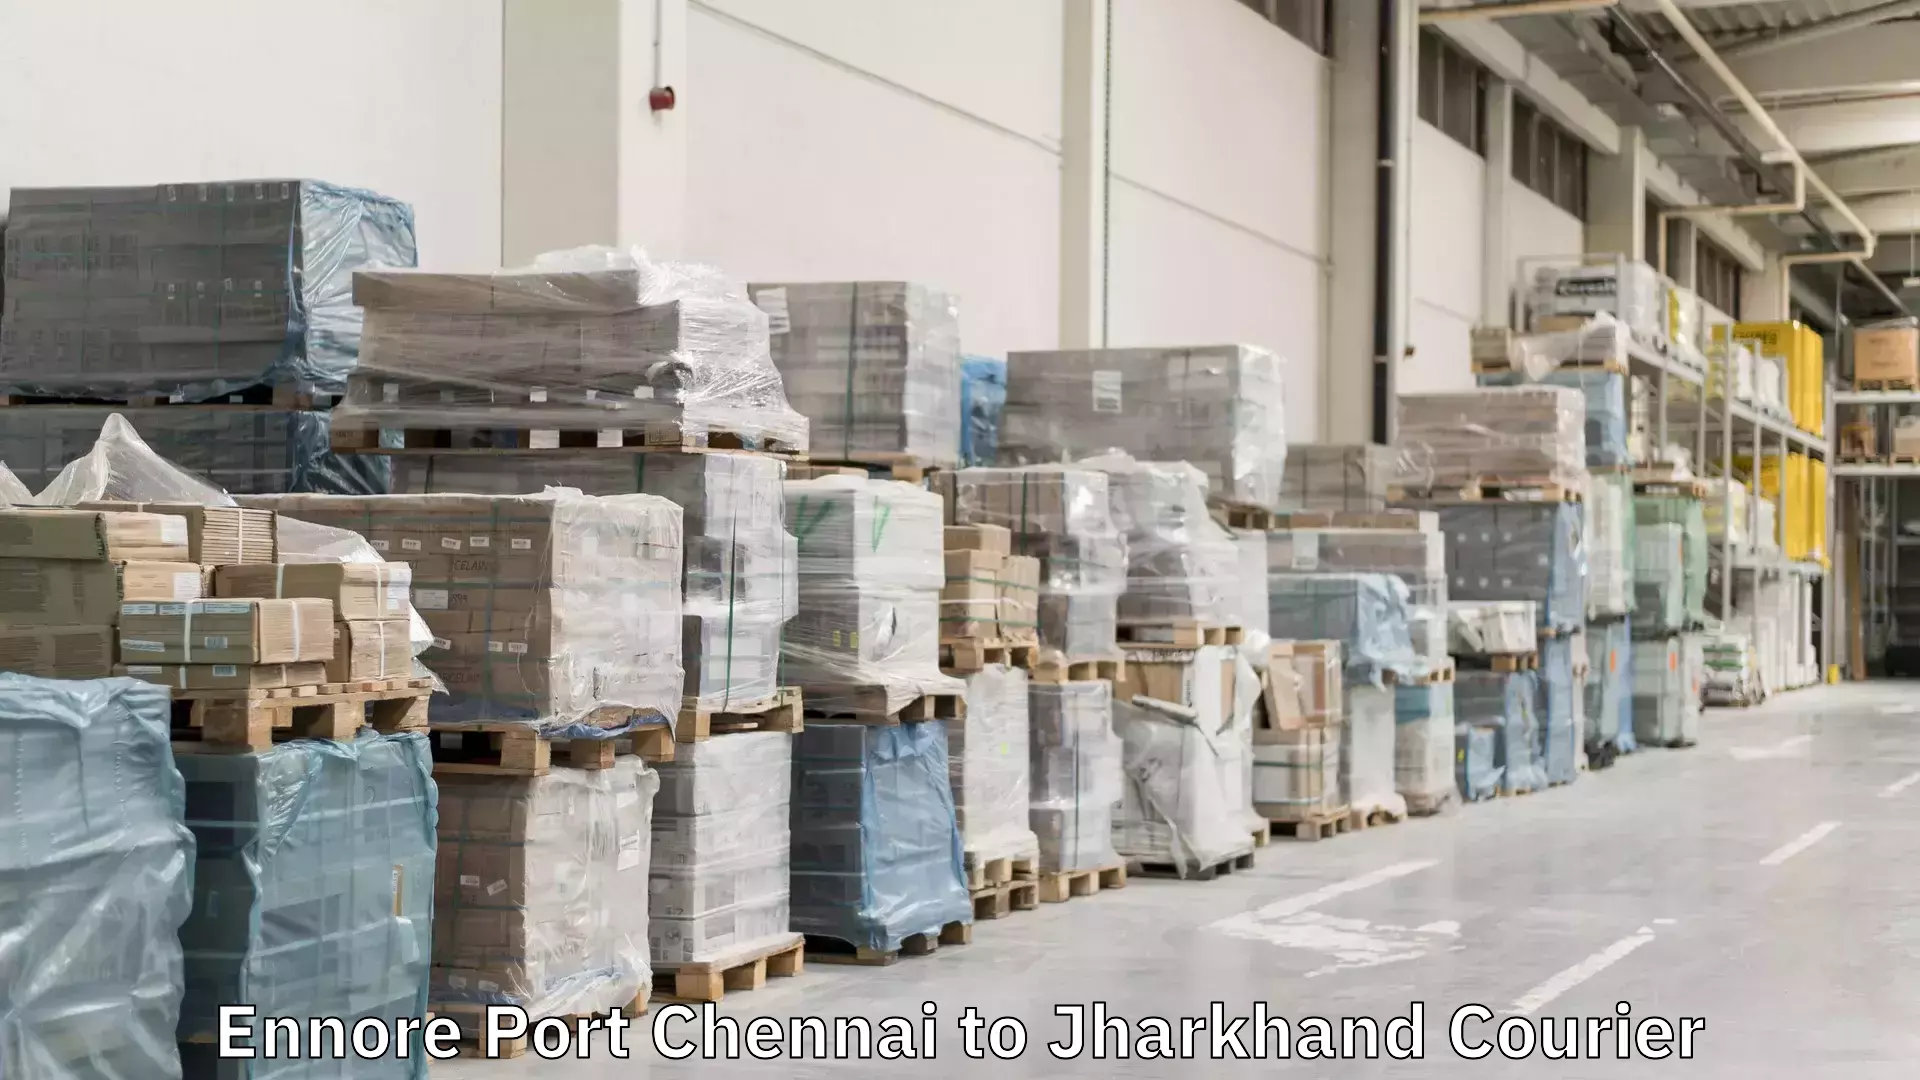 Nationwide parcel services Ennore Port Chennai to Jharkhand